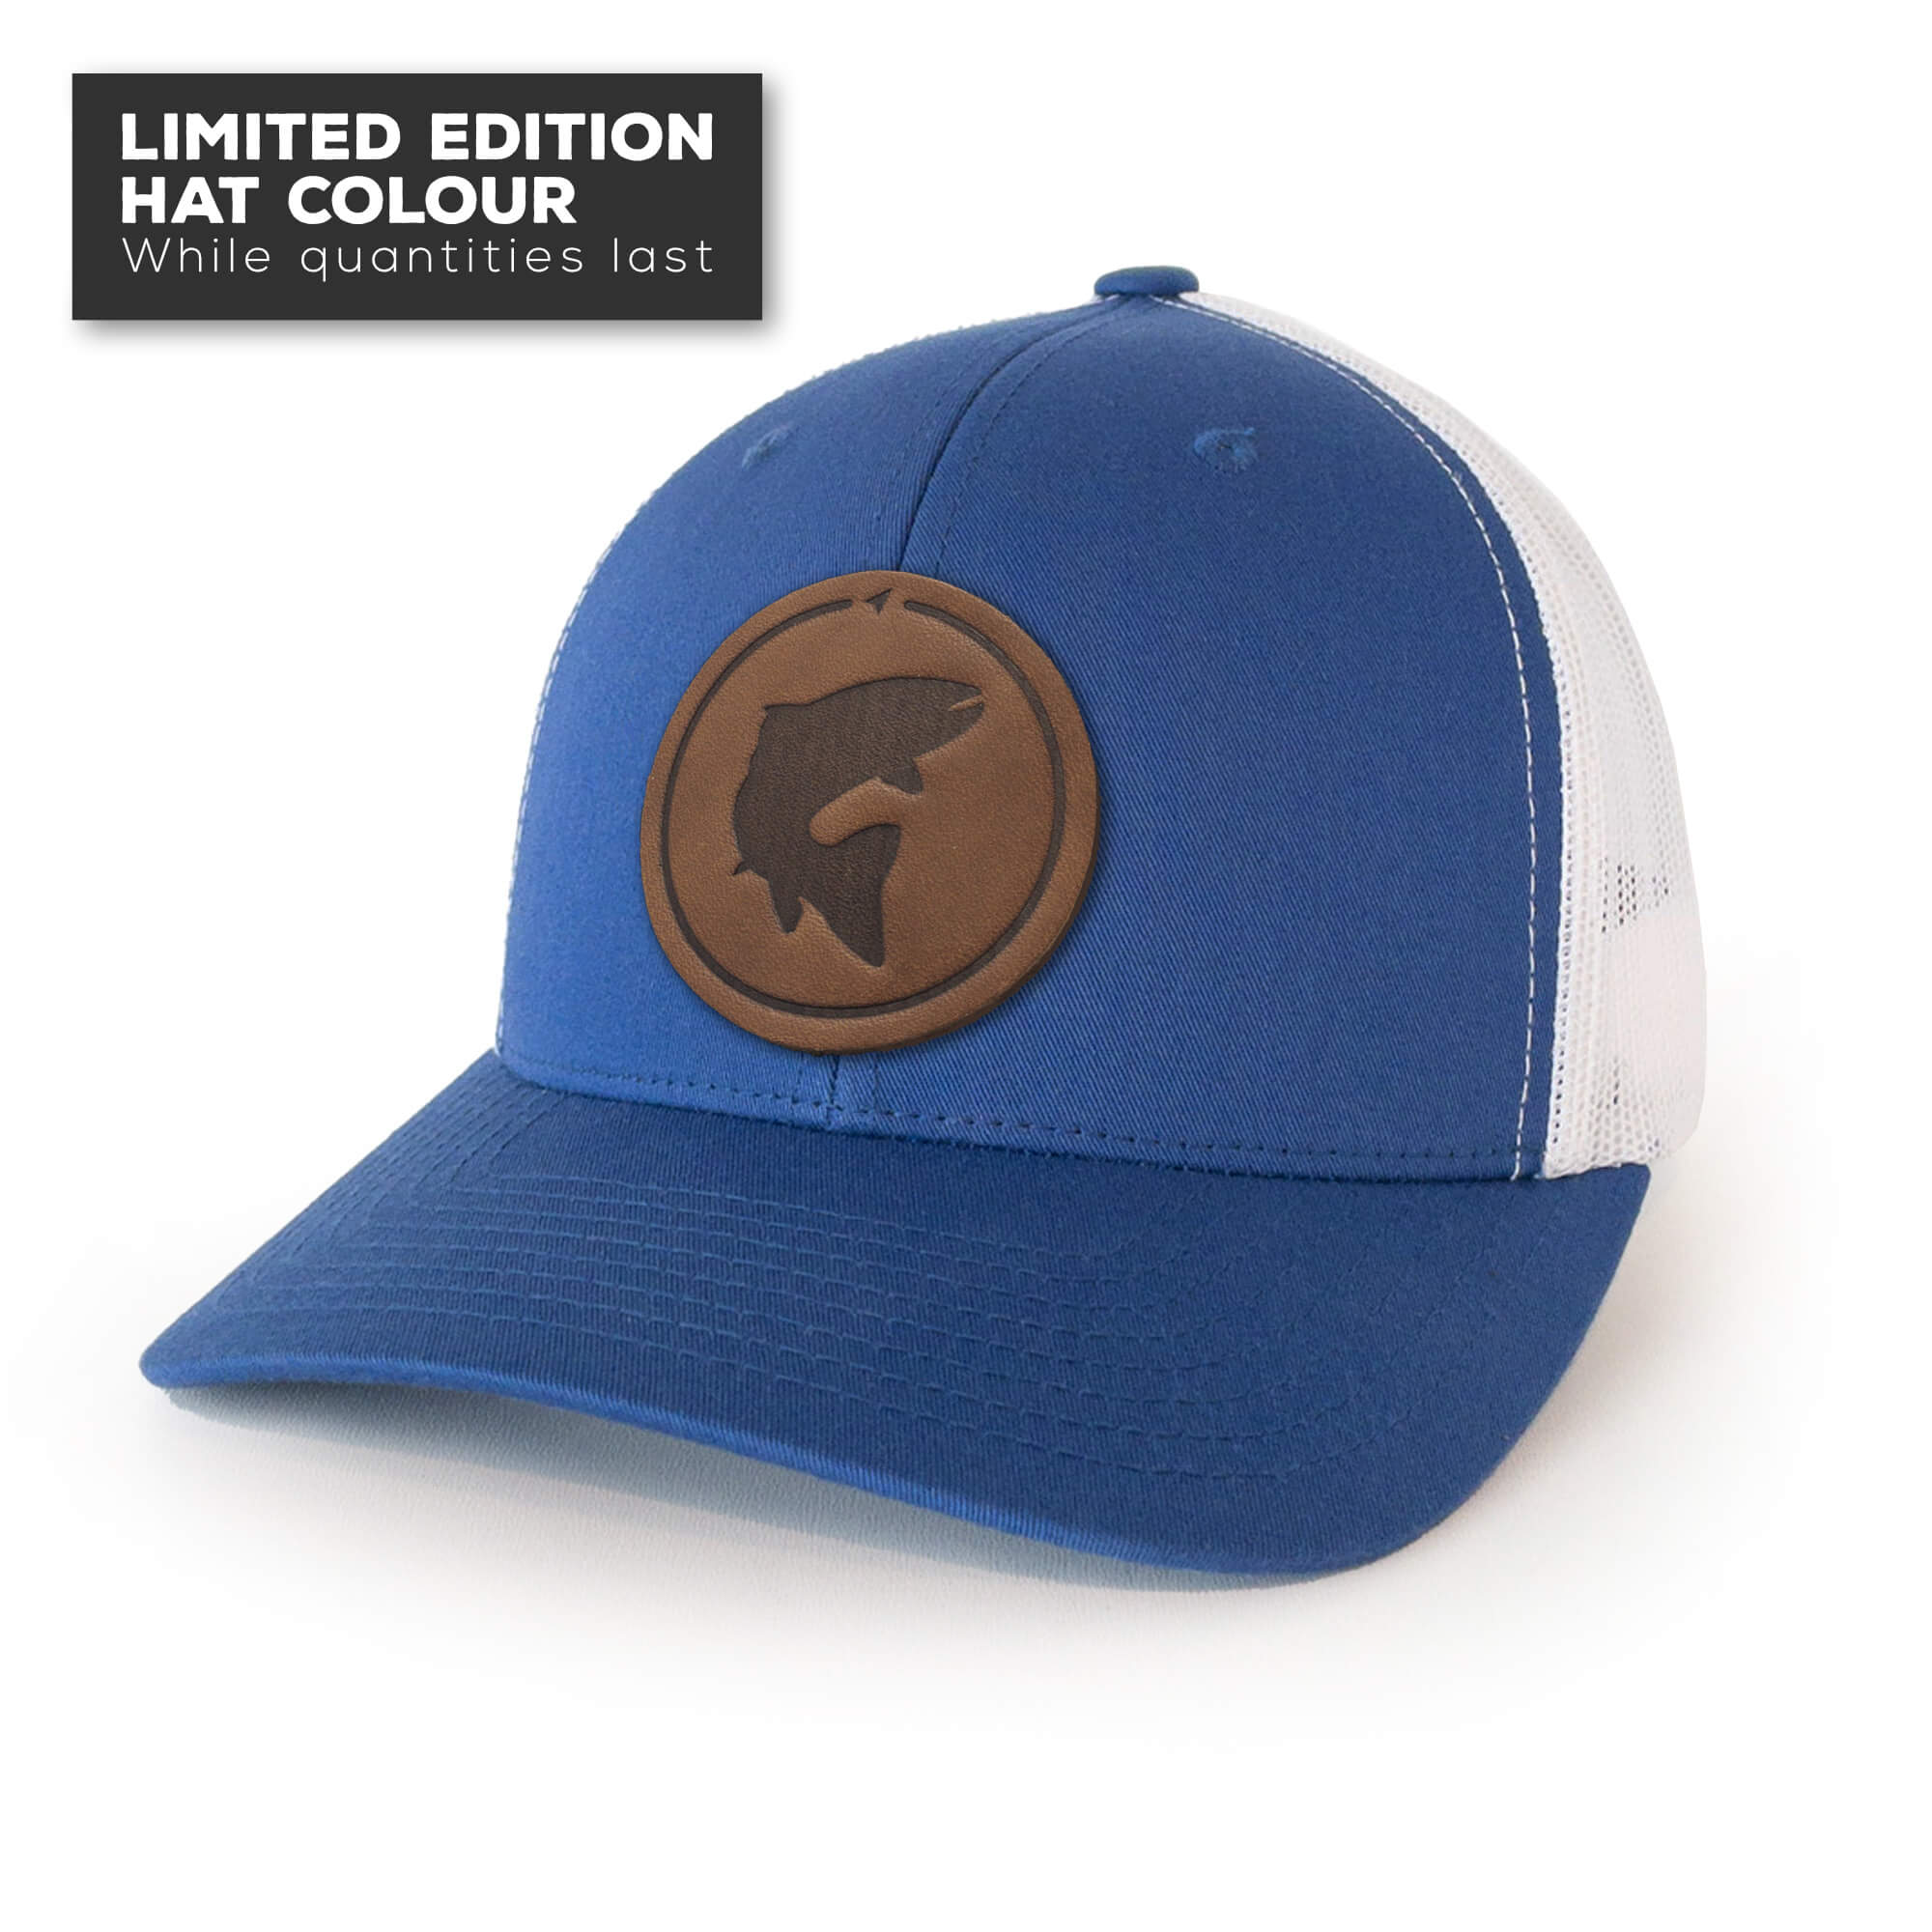 Royal Blue trucker hat with full-grain leather patch of Trout